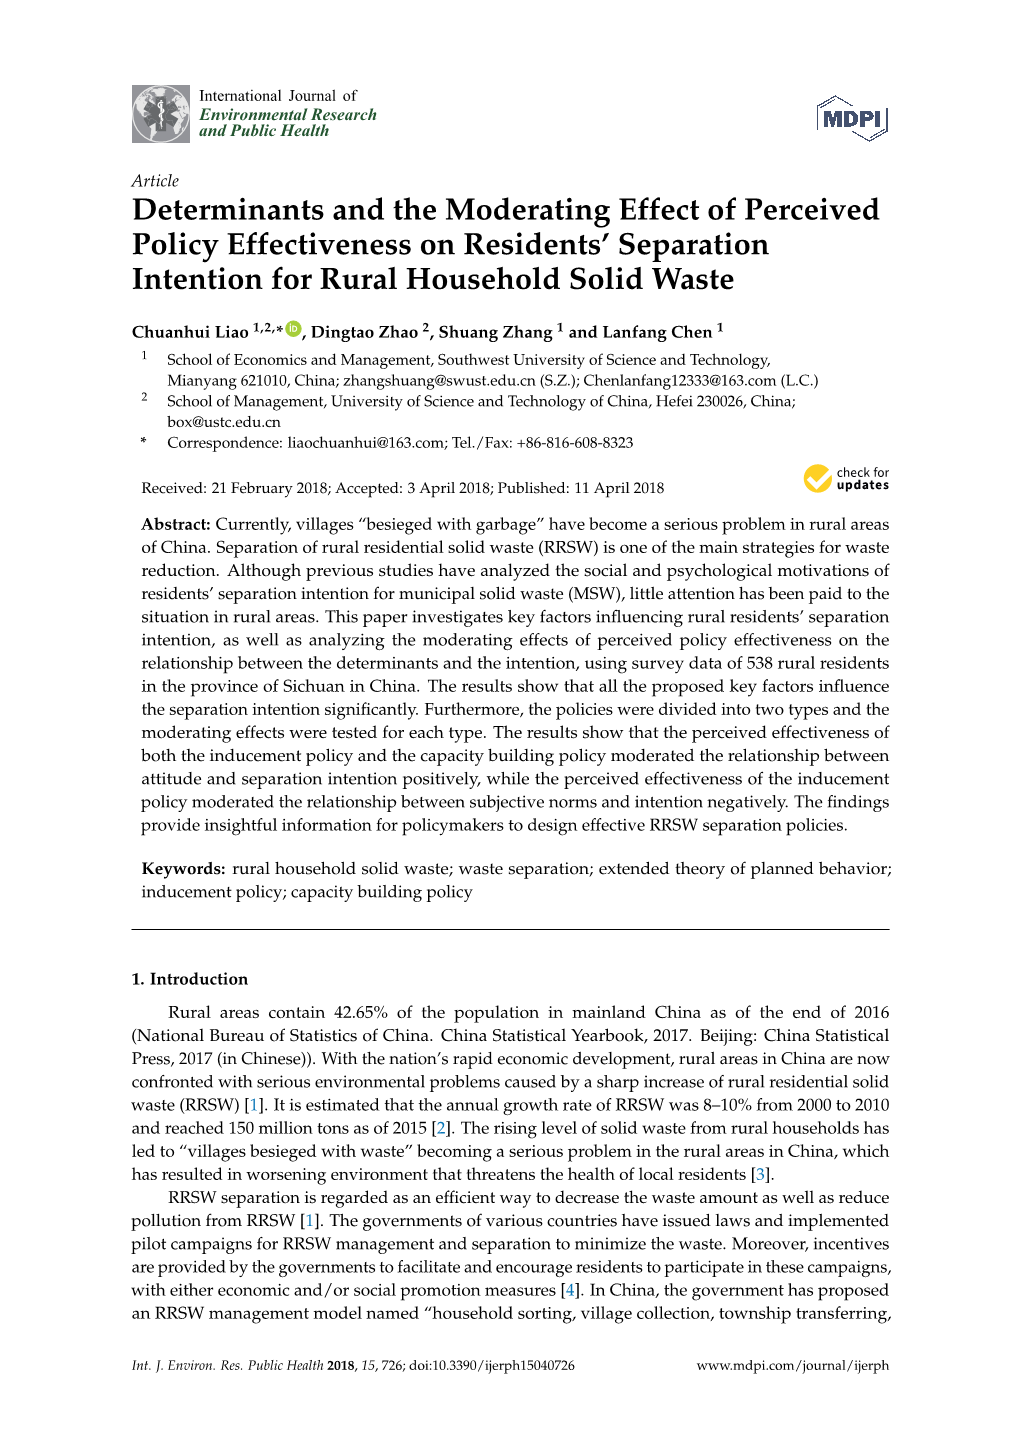 Determinants and the Moderating Effect of Perceived Policy Effectiveness on Residents’ Separation Intention for Rural Household Solid Waste